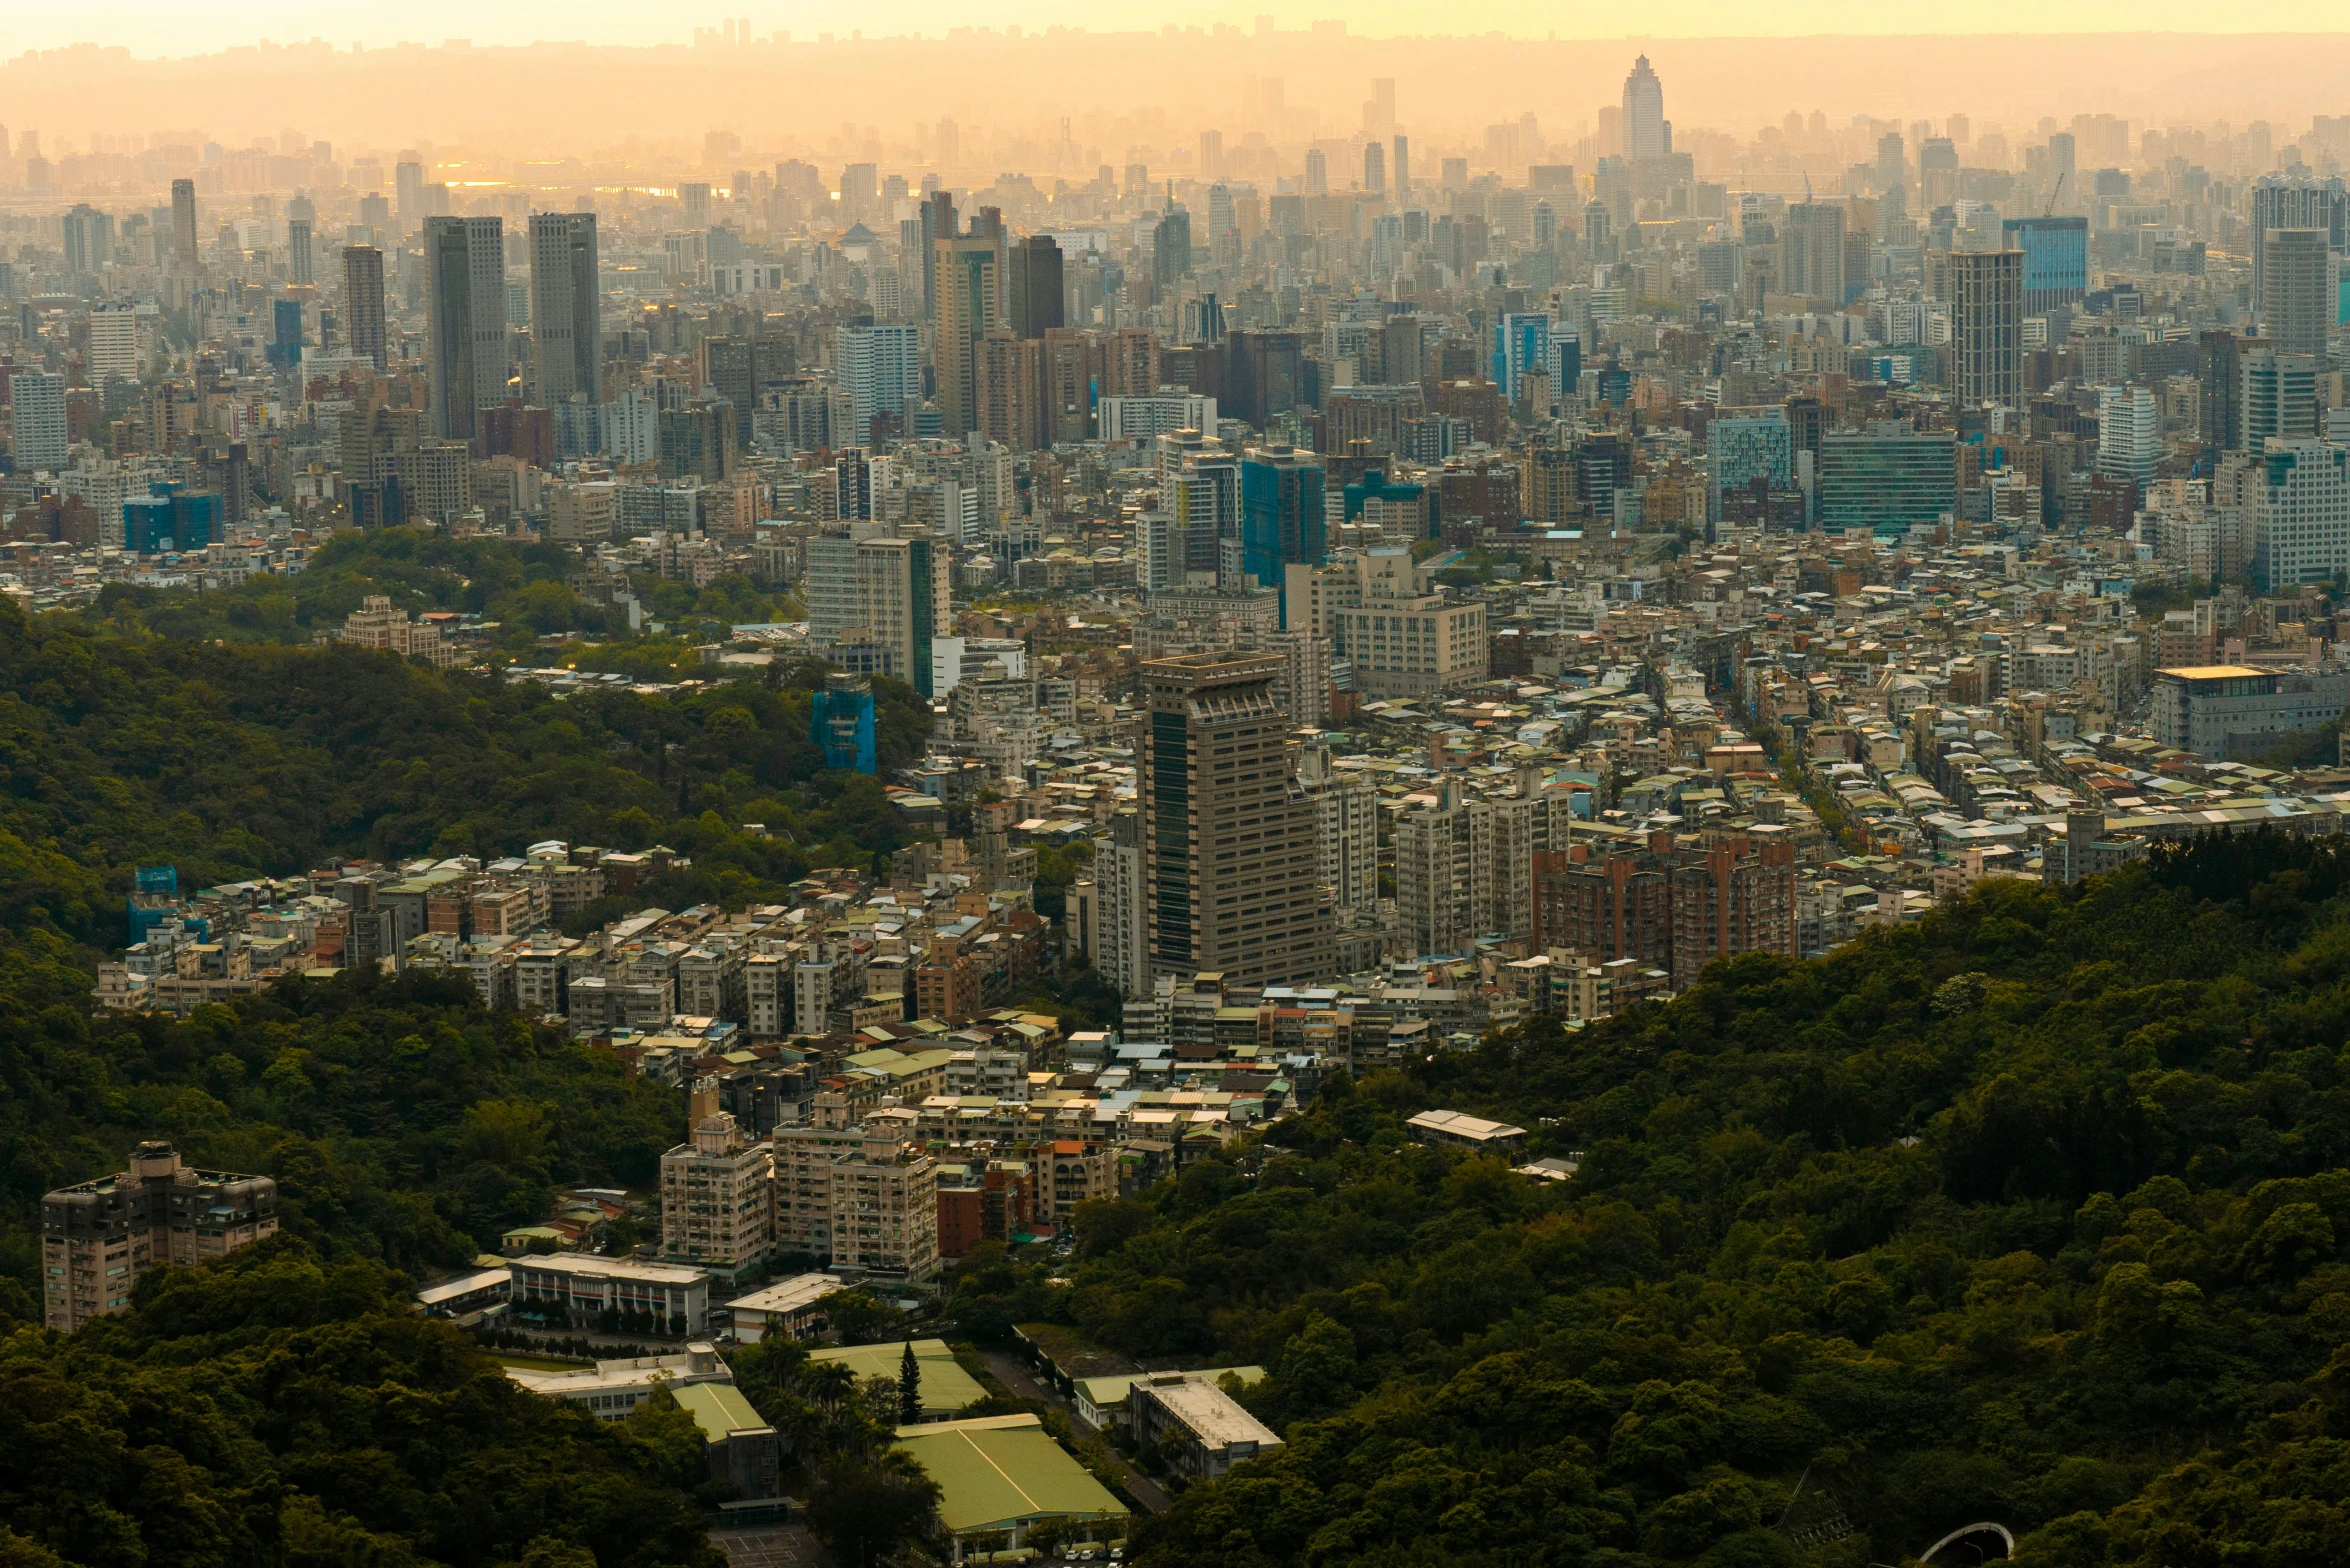 an aerial view of a city with green trees and hills